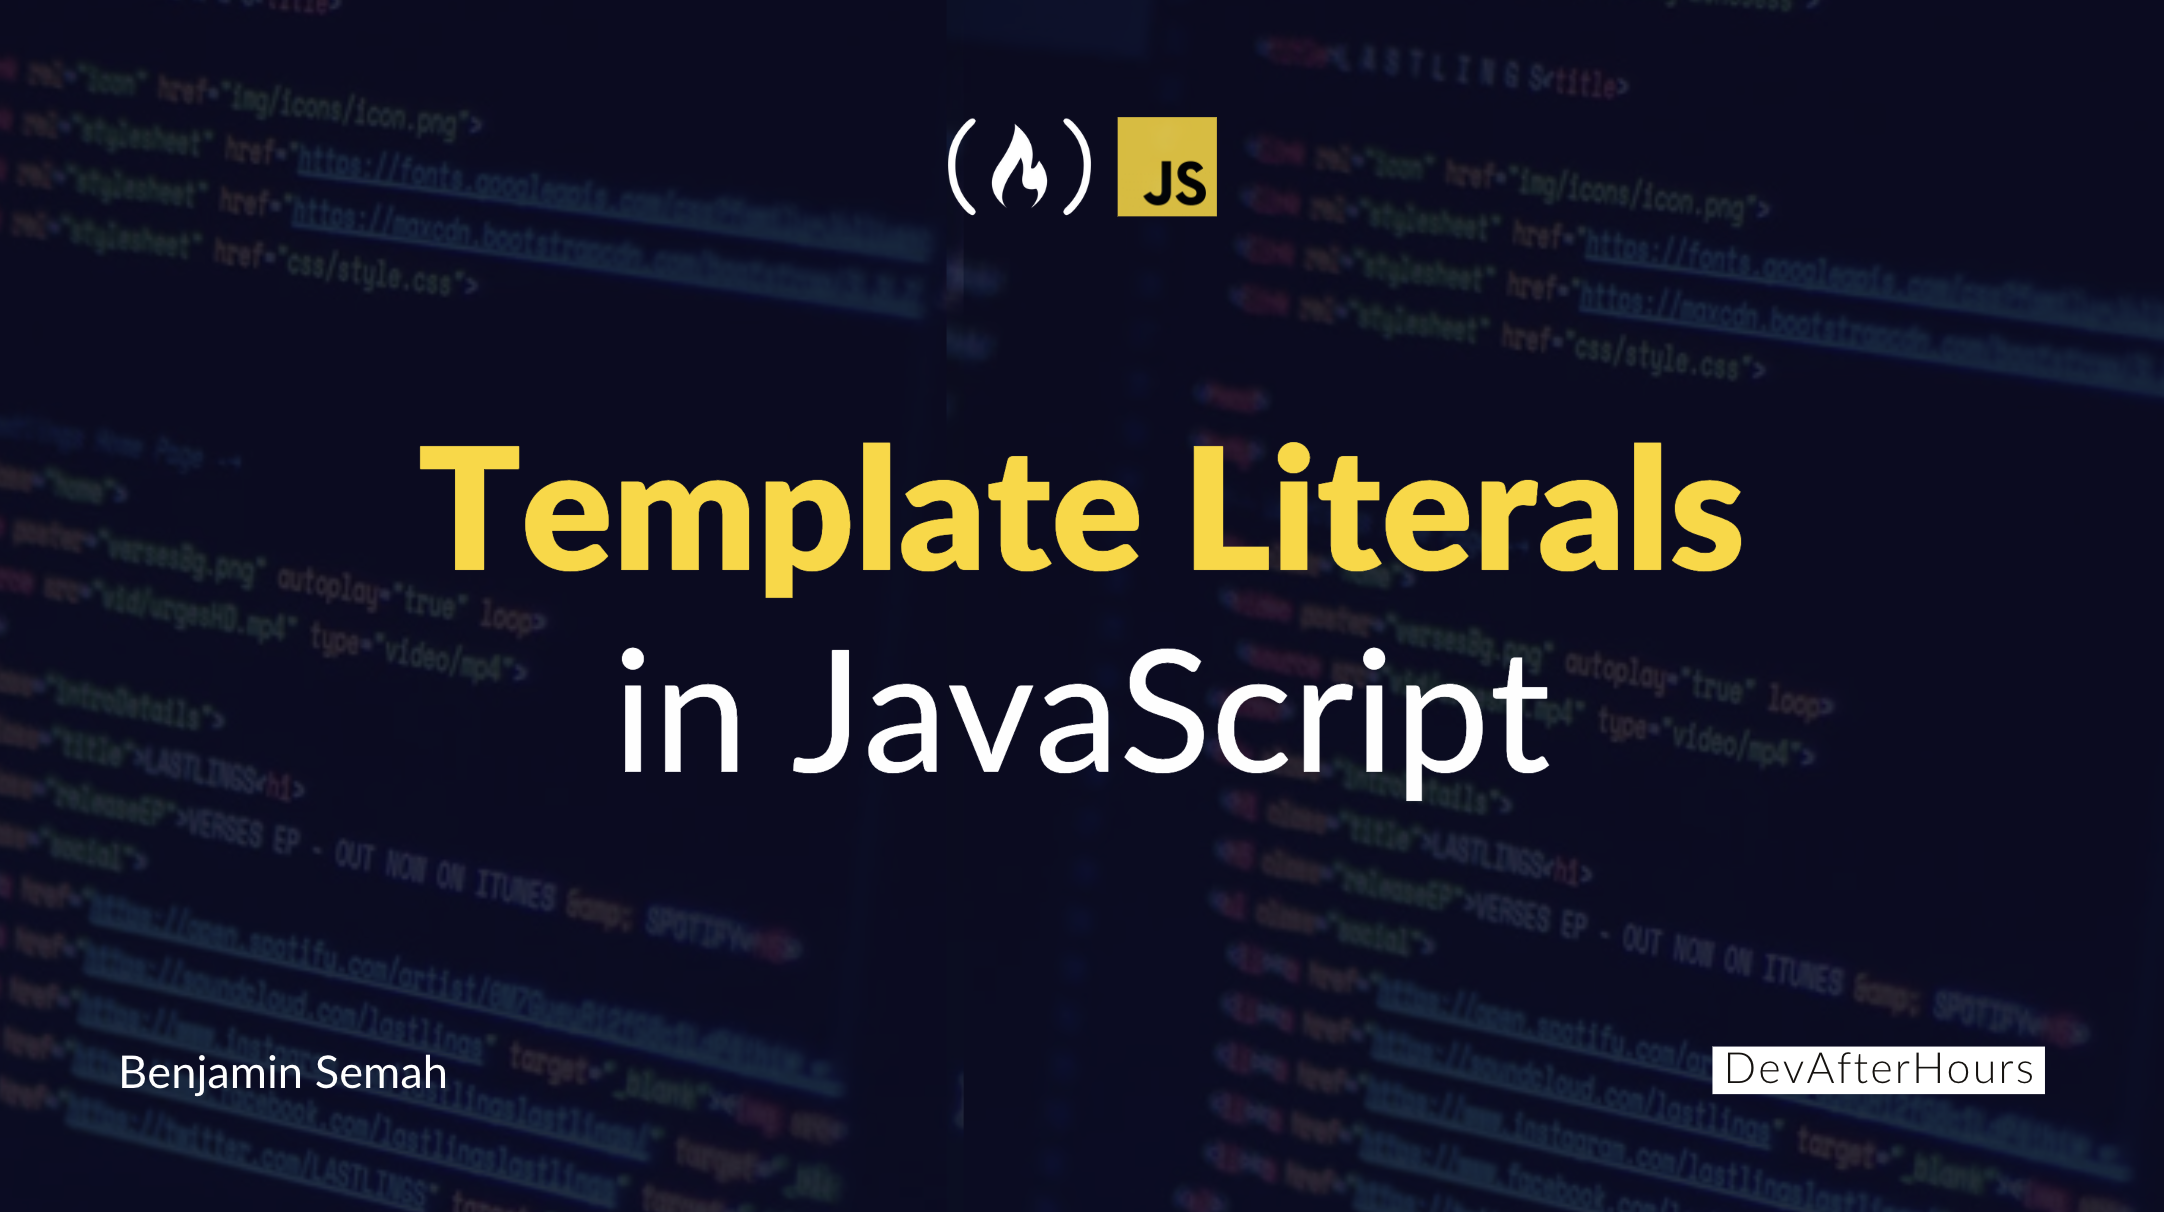 How to Use Template Literals in JavaScript